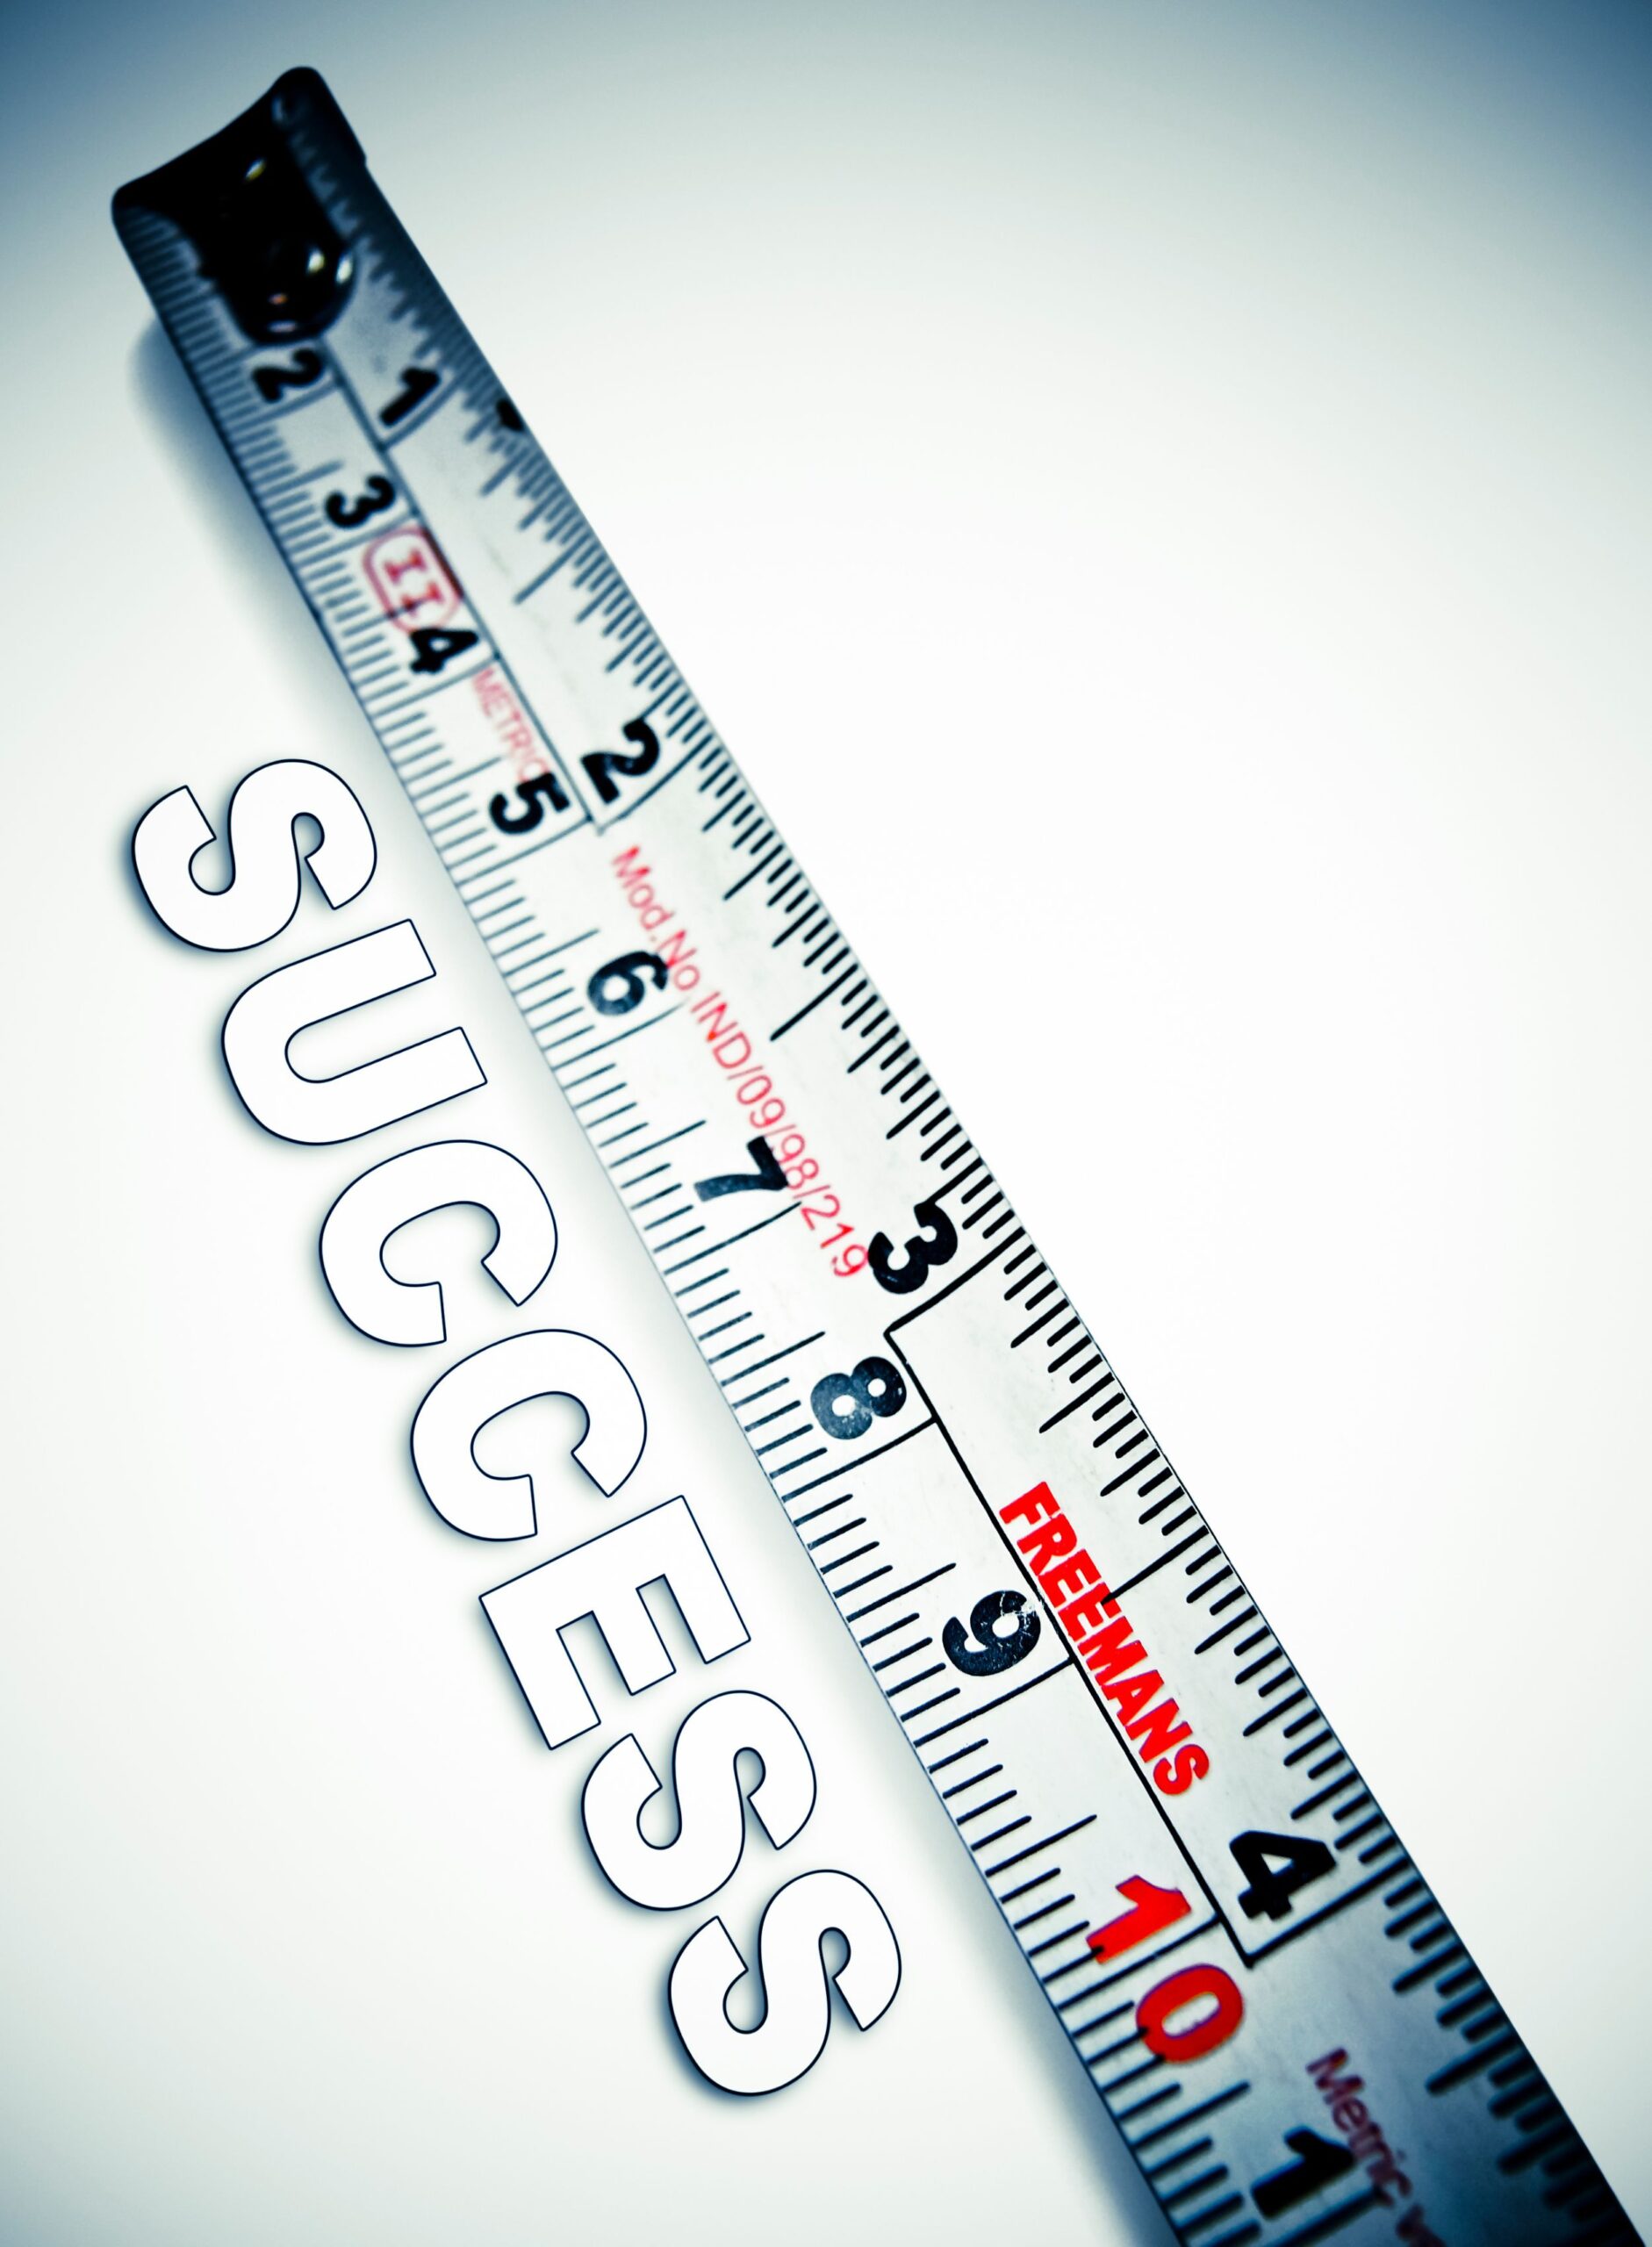 Measuring tape stretched above the word 'Success', symbolizing the measurement of web chat performance